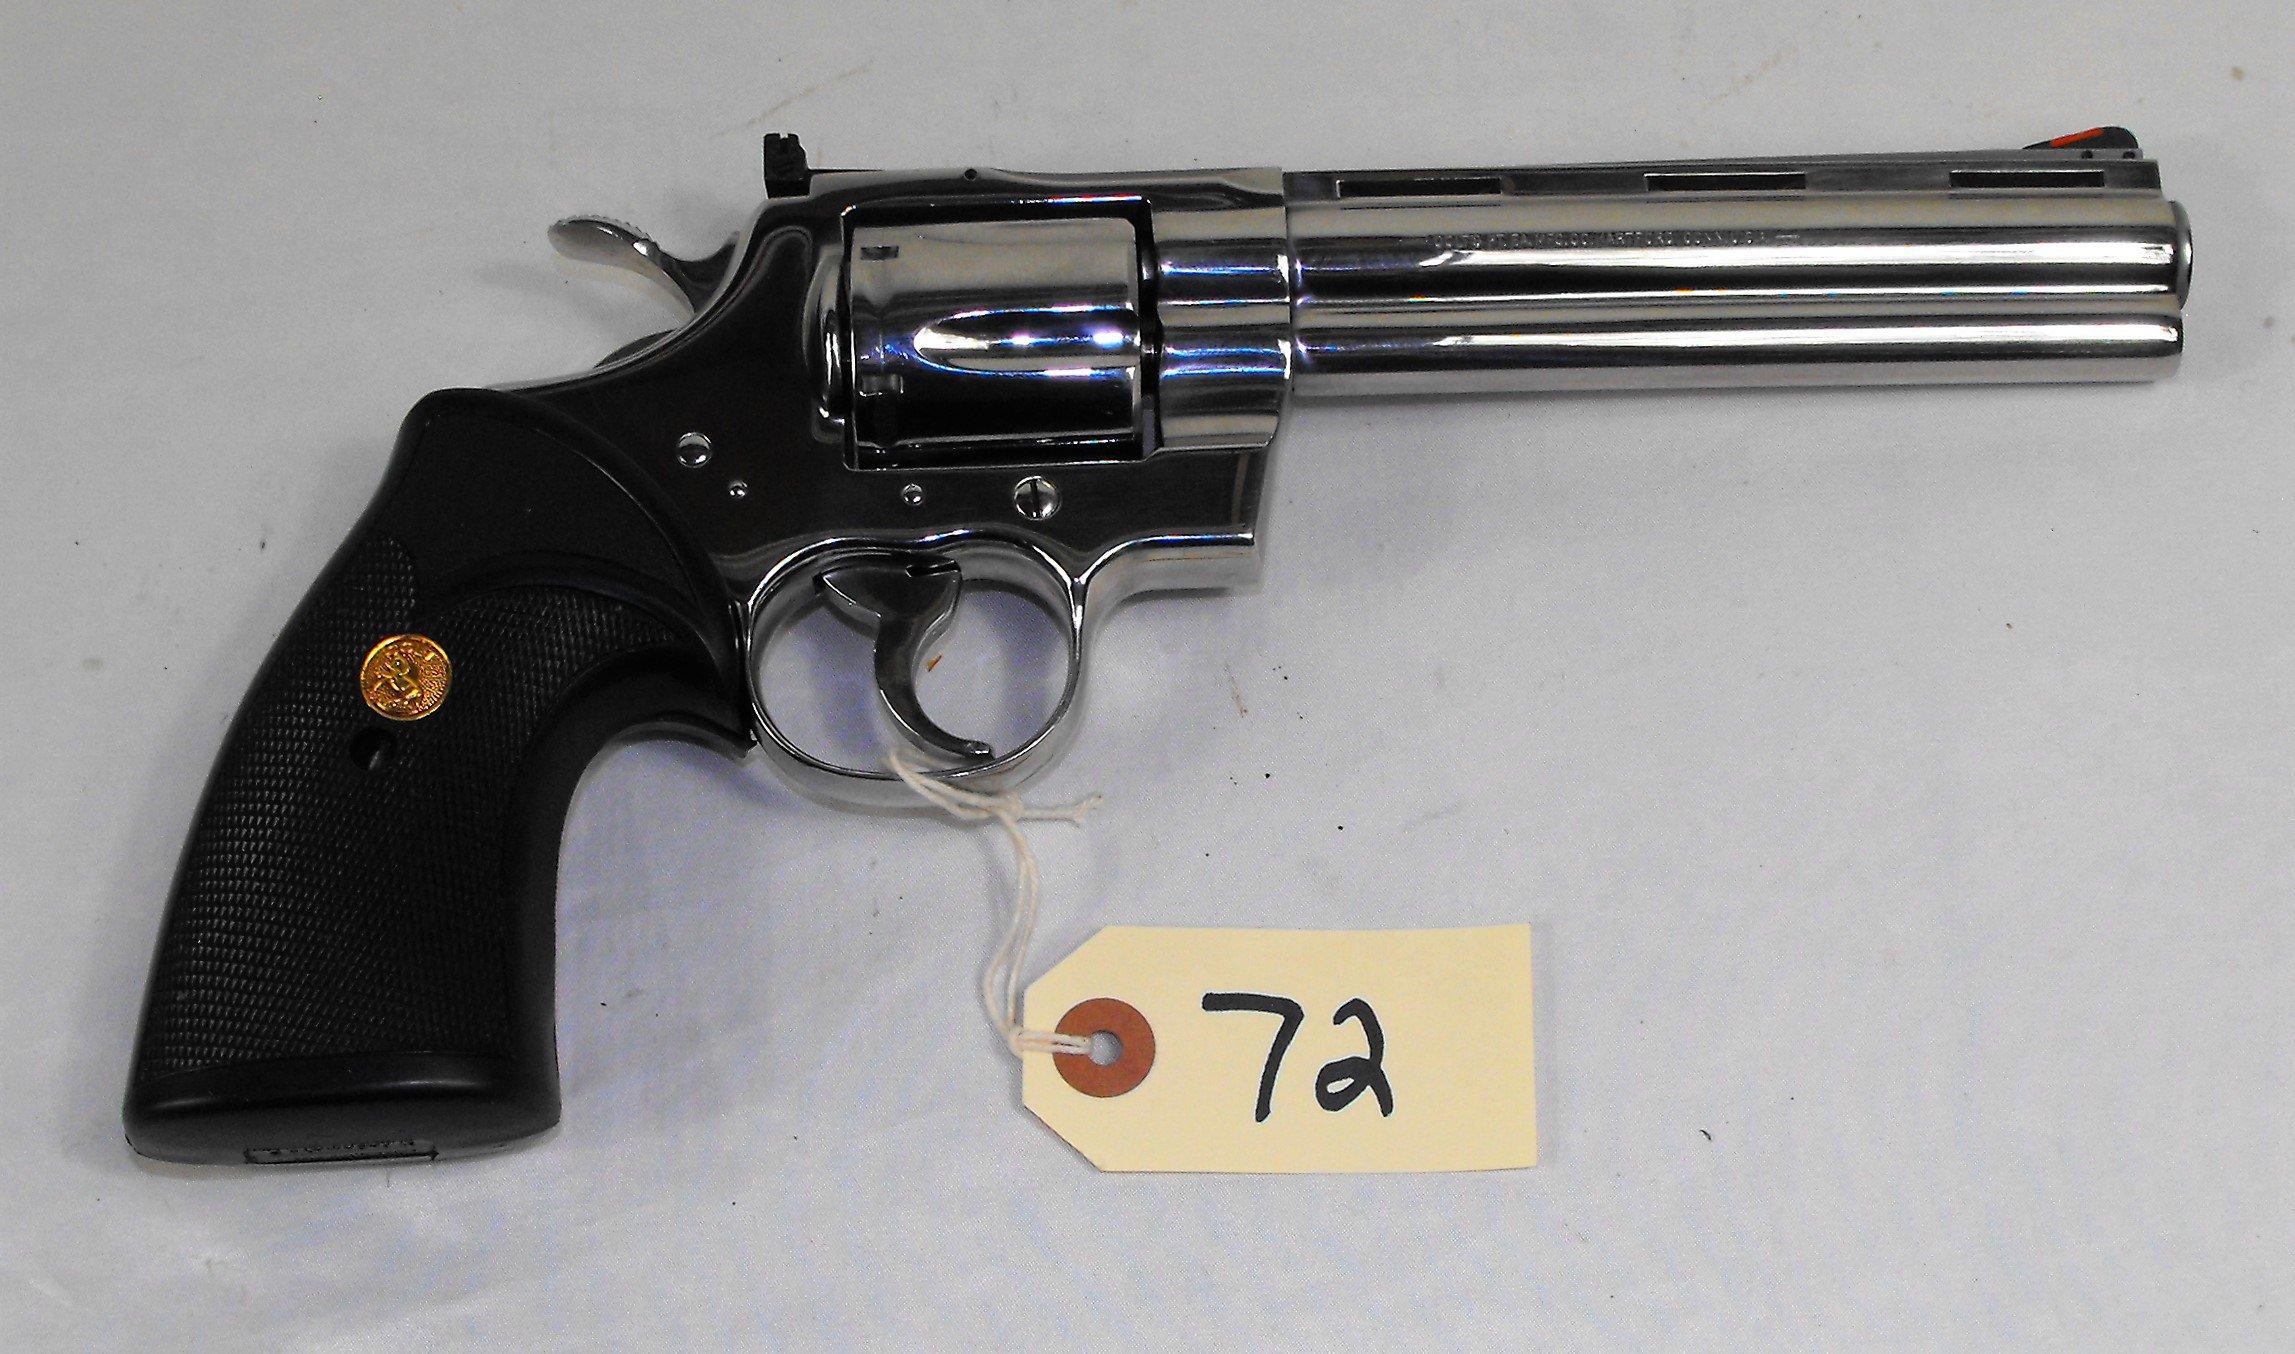 COLT PYTHON 357 MAG 6-SHOT DOUBLE ACTION “BRIGHT STAINLESS” REVOLVER